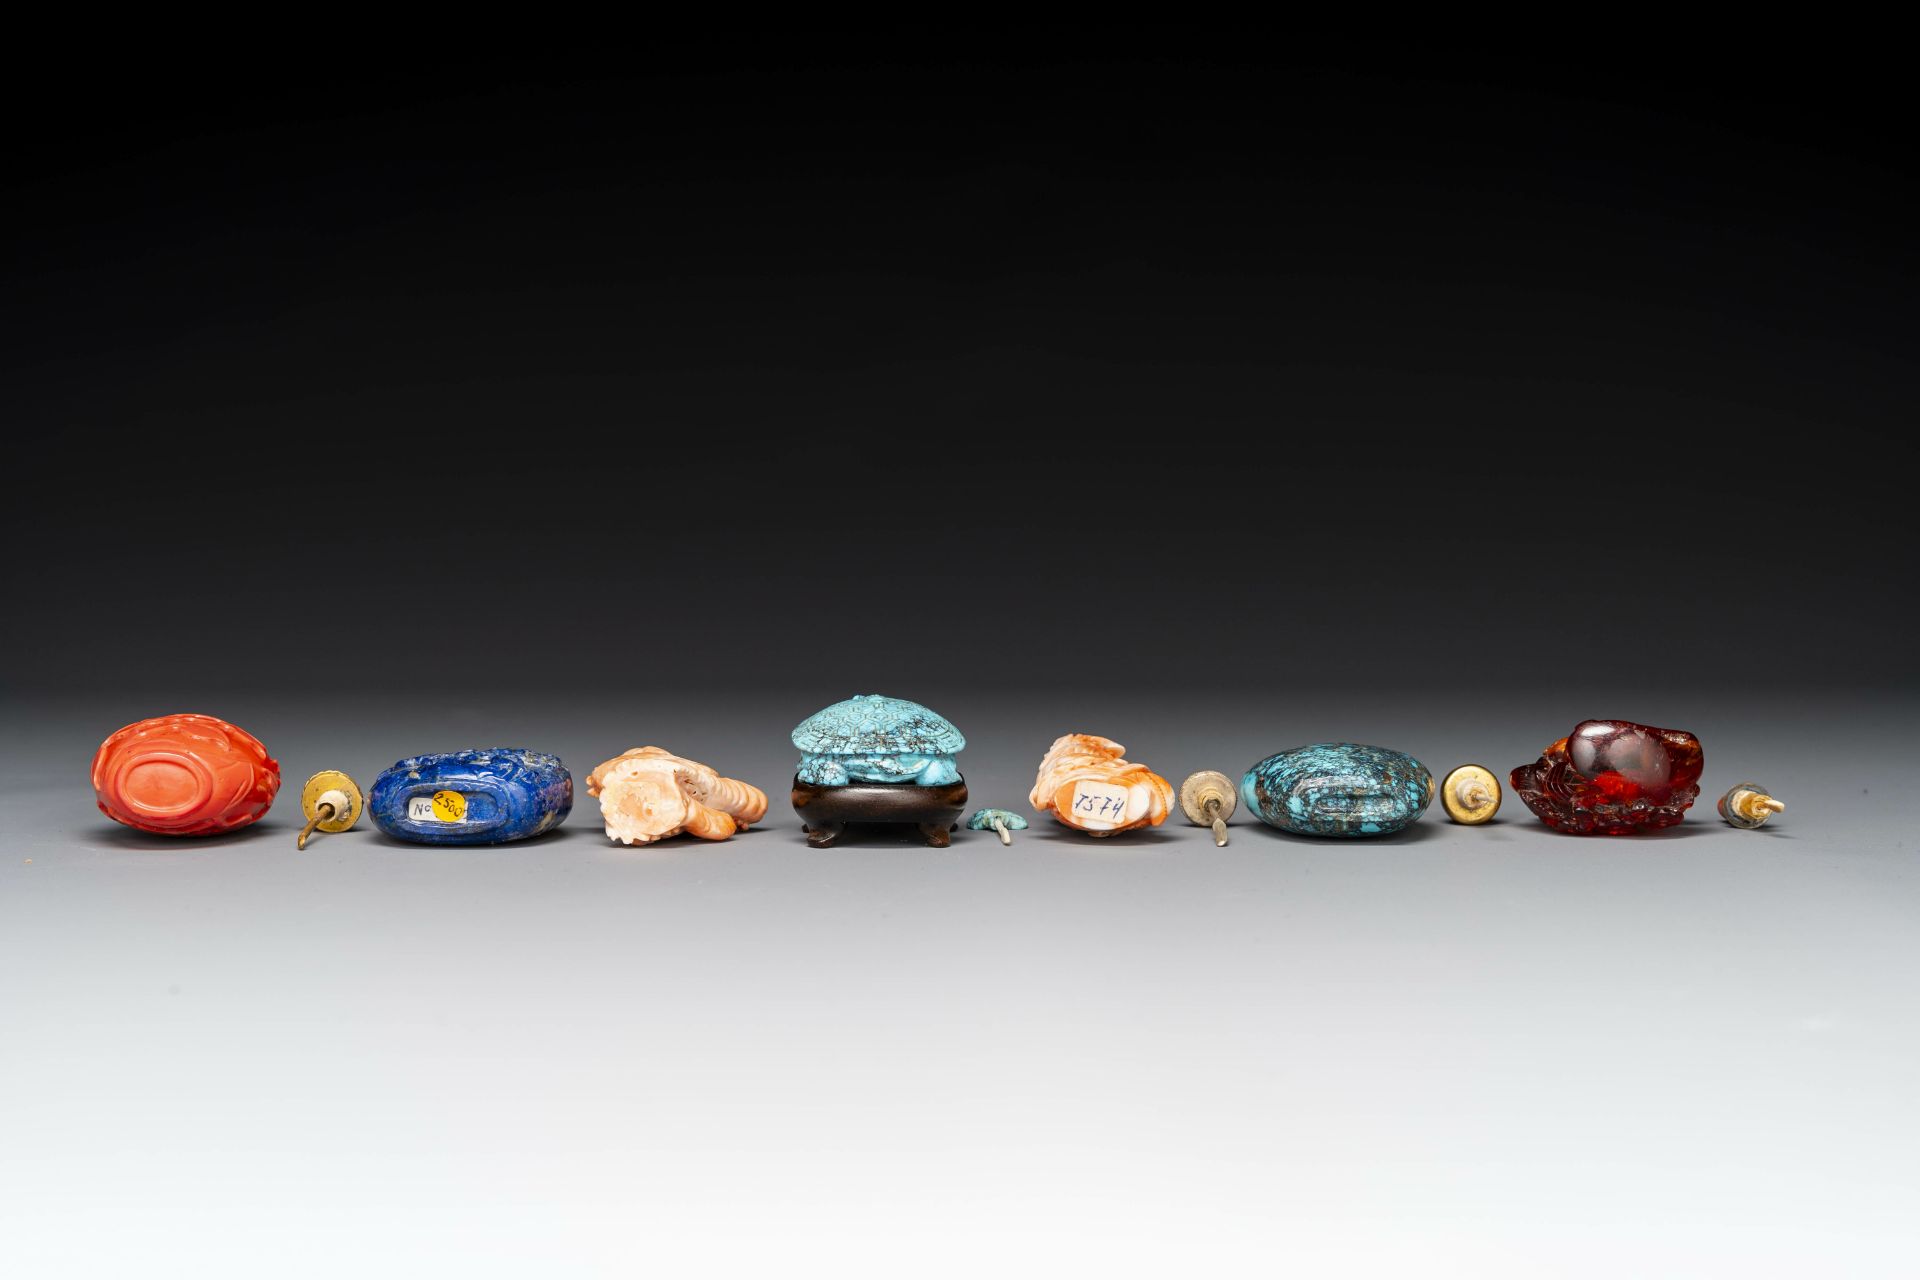 Seven varied Chinese snuff bottles of precious stone, red coral, glass and amber, 19th C. - Image 7 of 7